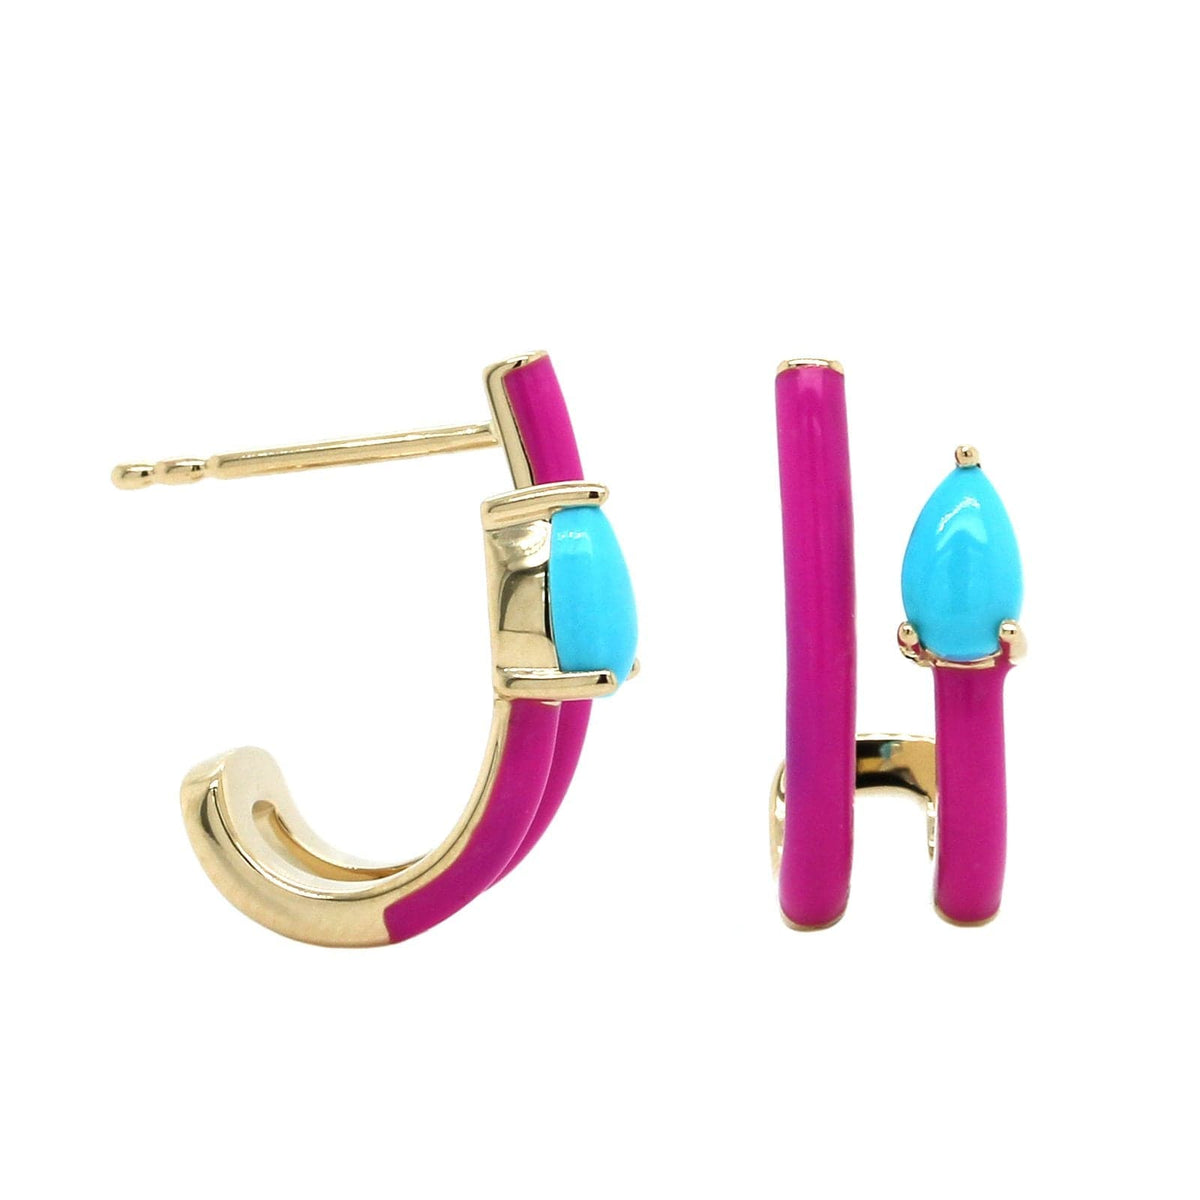 The Jenna 14K Yellow Gold 2 Row Turquoise with Neon Pink Enamel Huggie Earrings, 14K Yellow Gold, Long's Jewelers